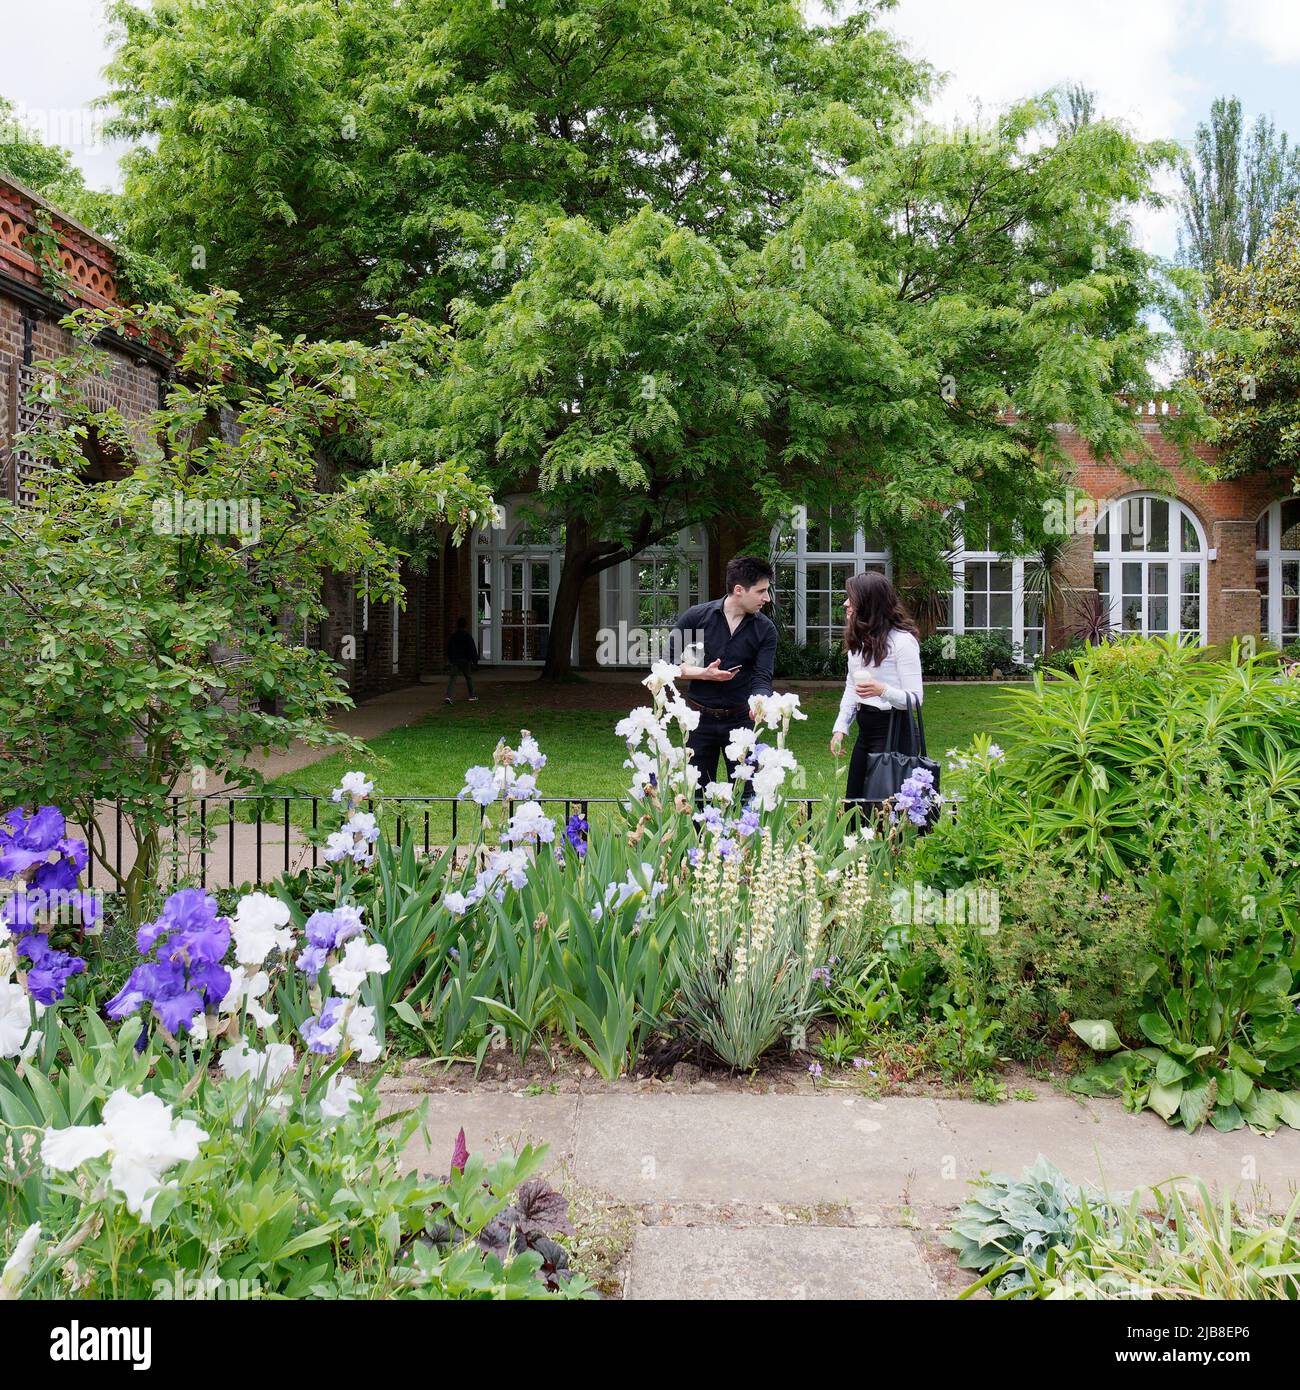 London, Greater London, England, May 28 2022: Couple look at the flowers in the Lawned garden with Orangery at Holland Park in the Kensington area. Stock Photo